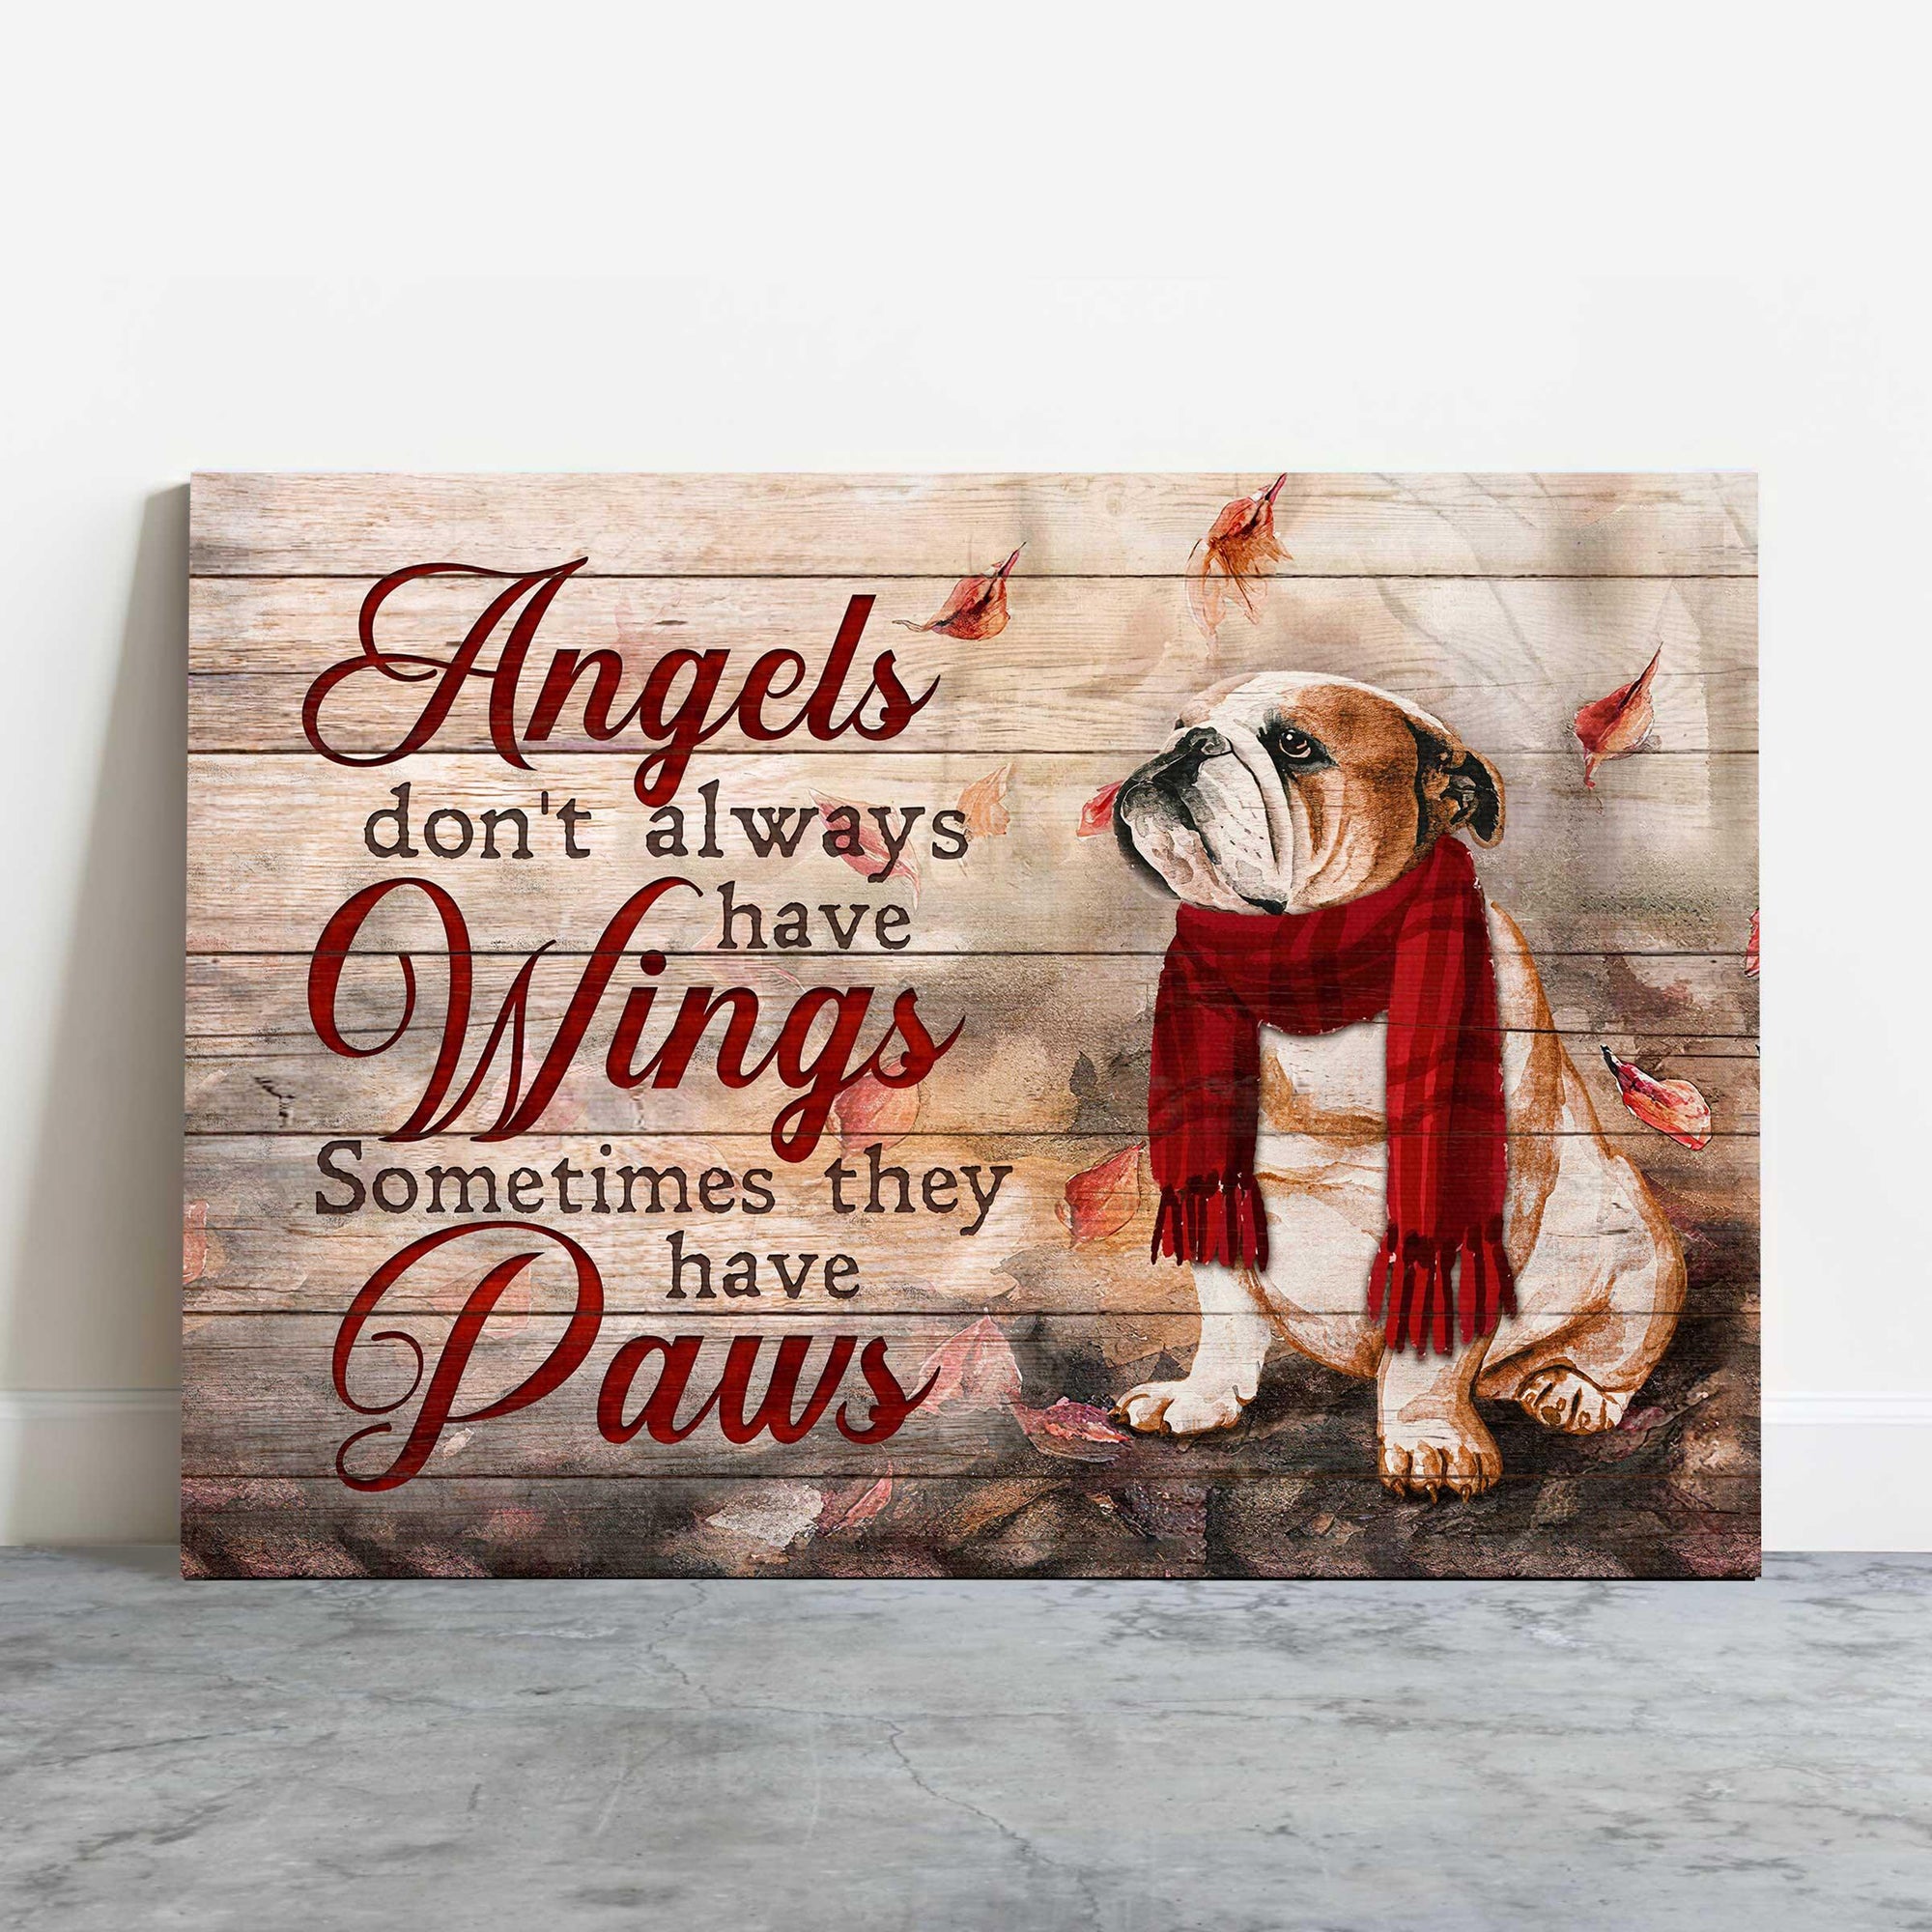 Bulldog Landscape Canvas - Bulldog Angels Don’t Always Have Wings, Sometimes They Have Paws - Memorial Gift For Bulldog Lovers, Dog Lovers, Owners - Amzanimalsgift